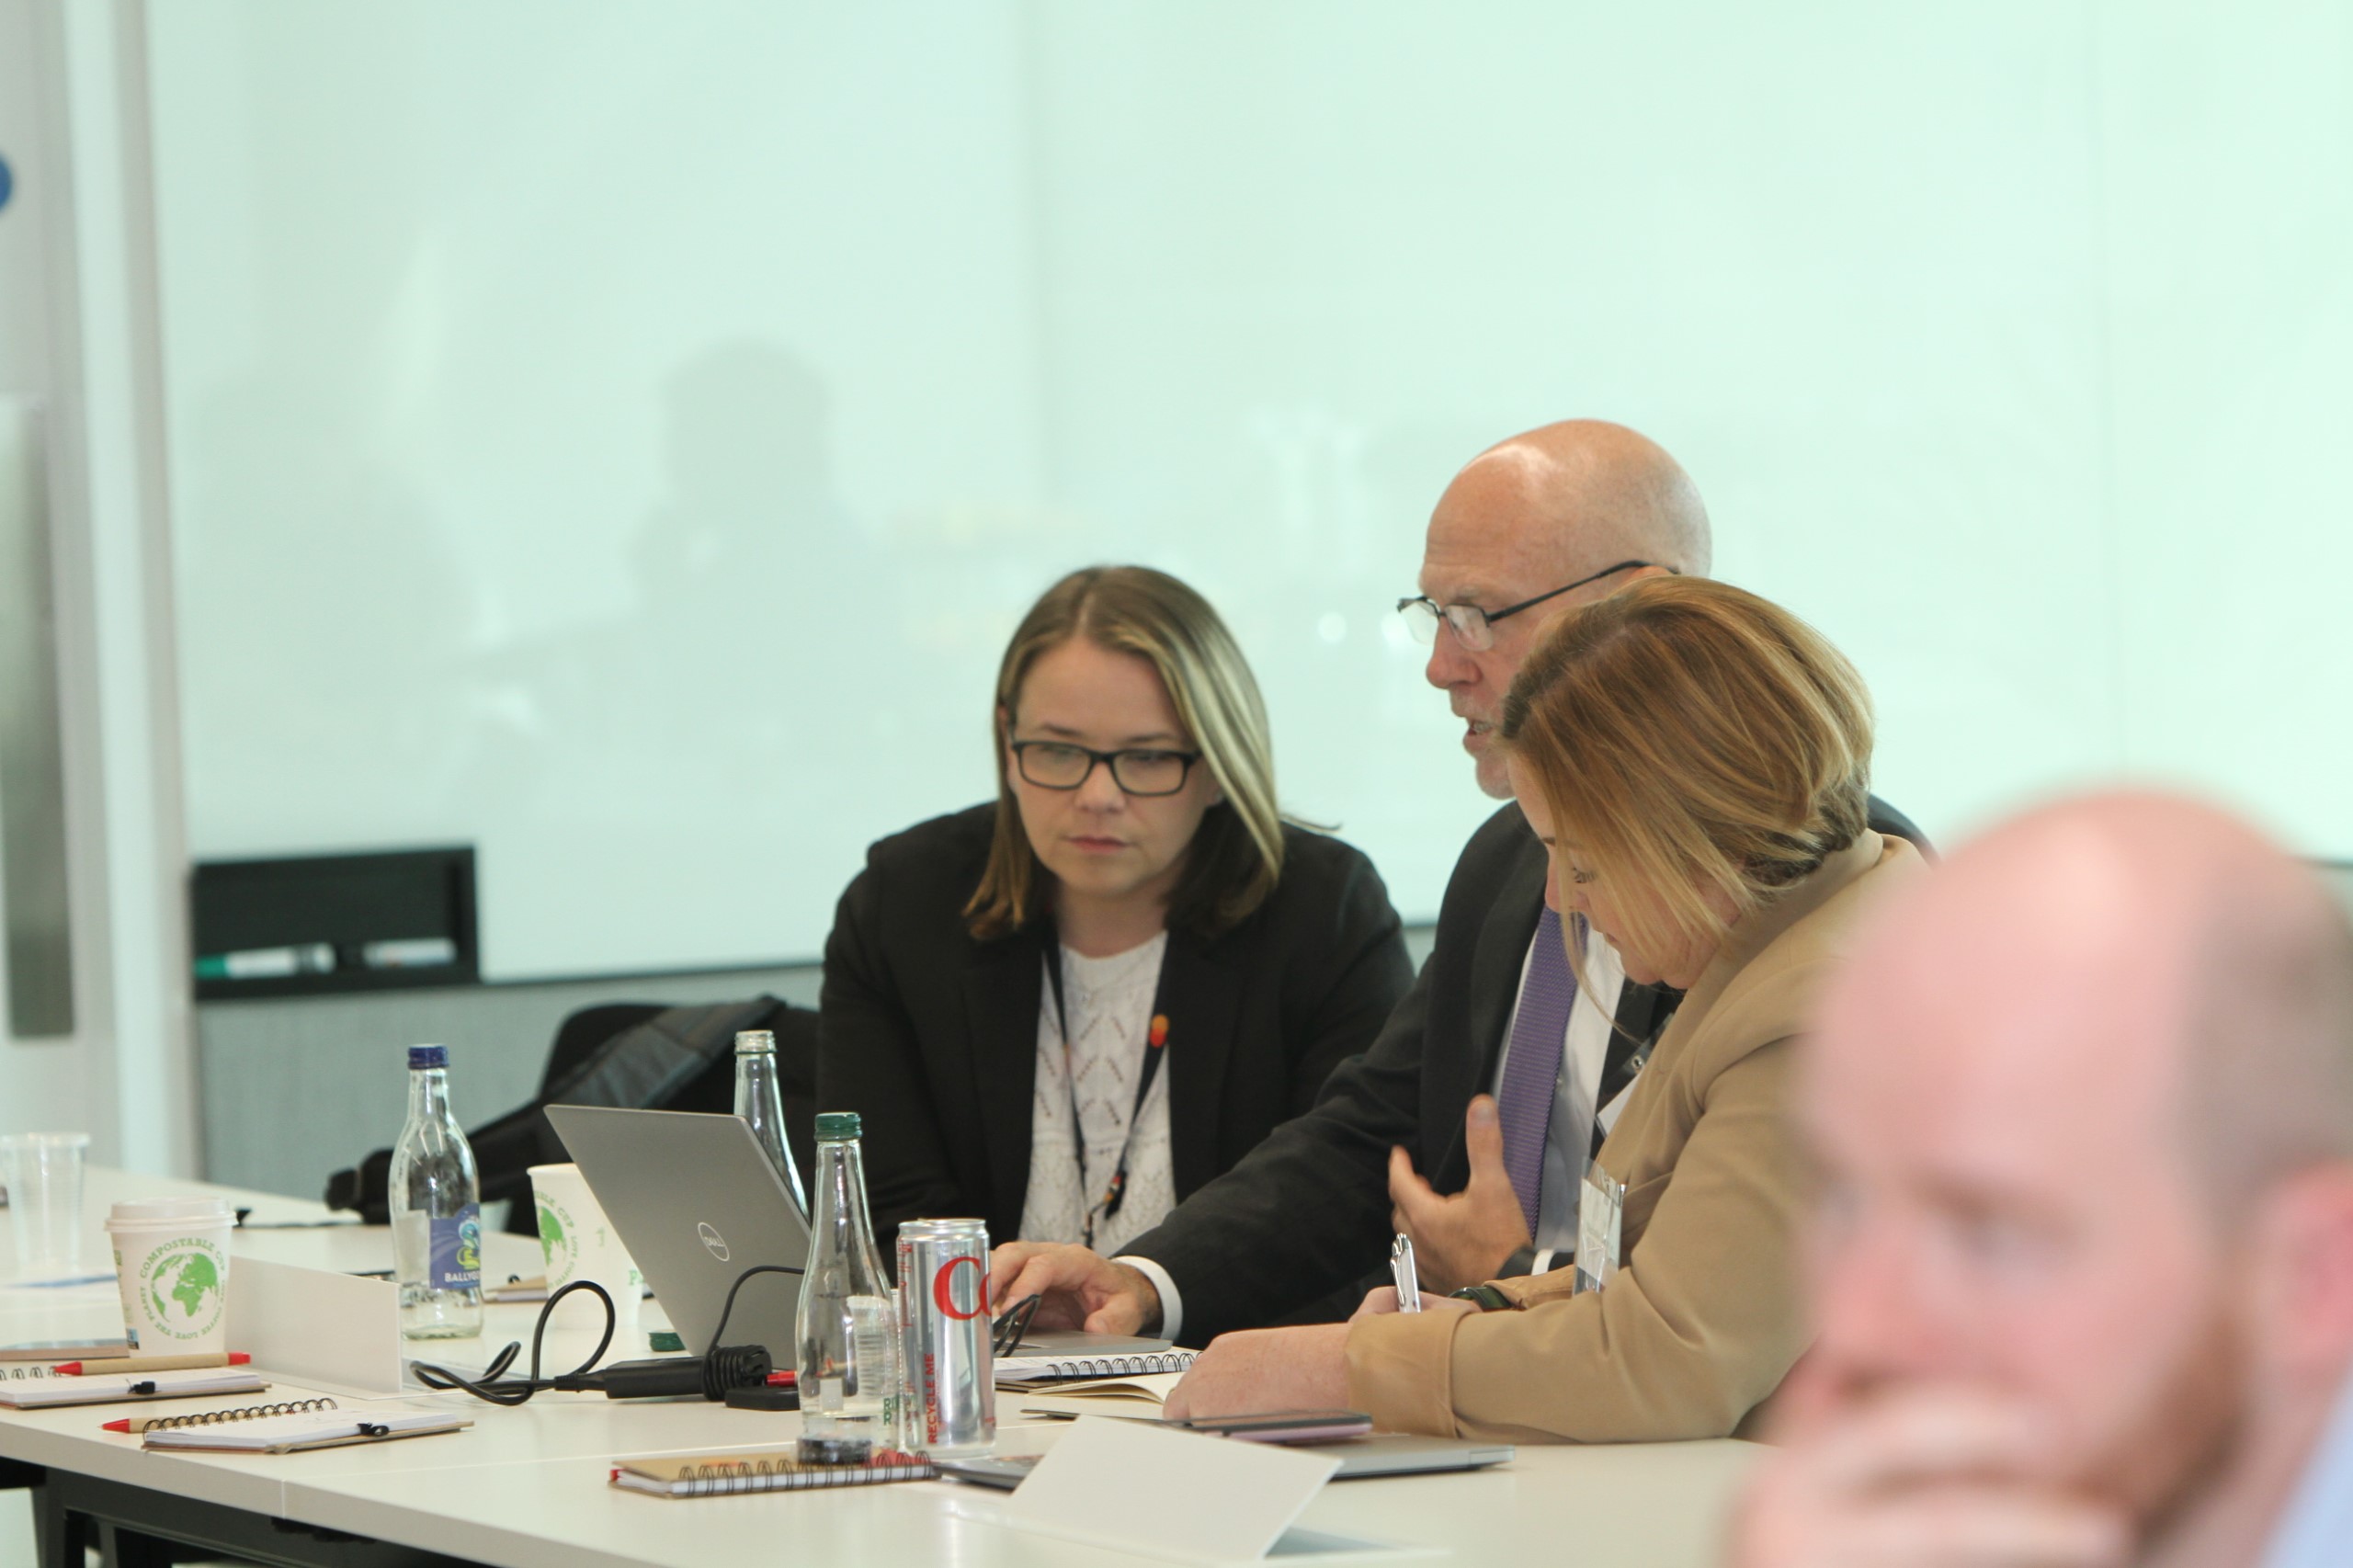 Mastercard's Marie Hansen, left and Michael Lashlee, center, work through a potential response to a disinformation attack at the company's annual threatcasting exercise with Michelle Garrigan, right, from Bank of America.